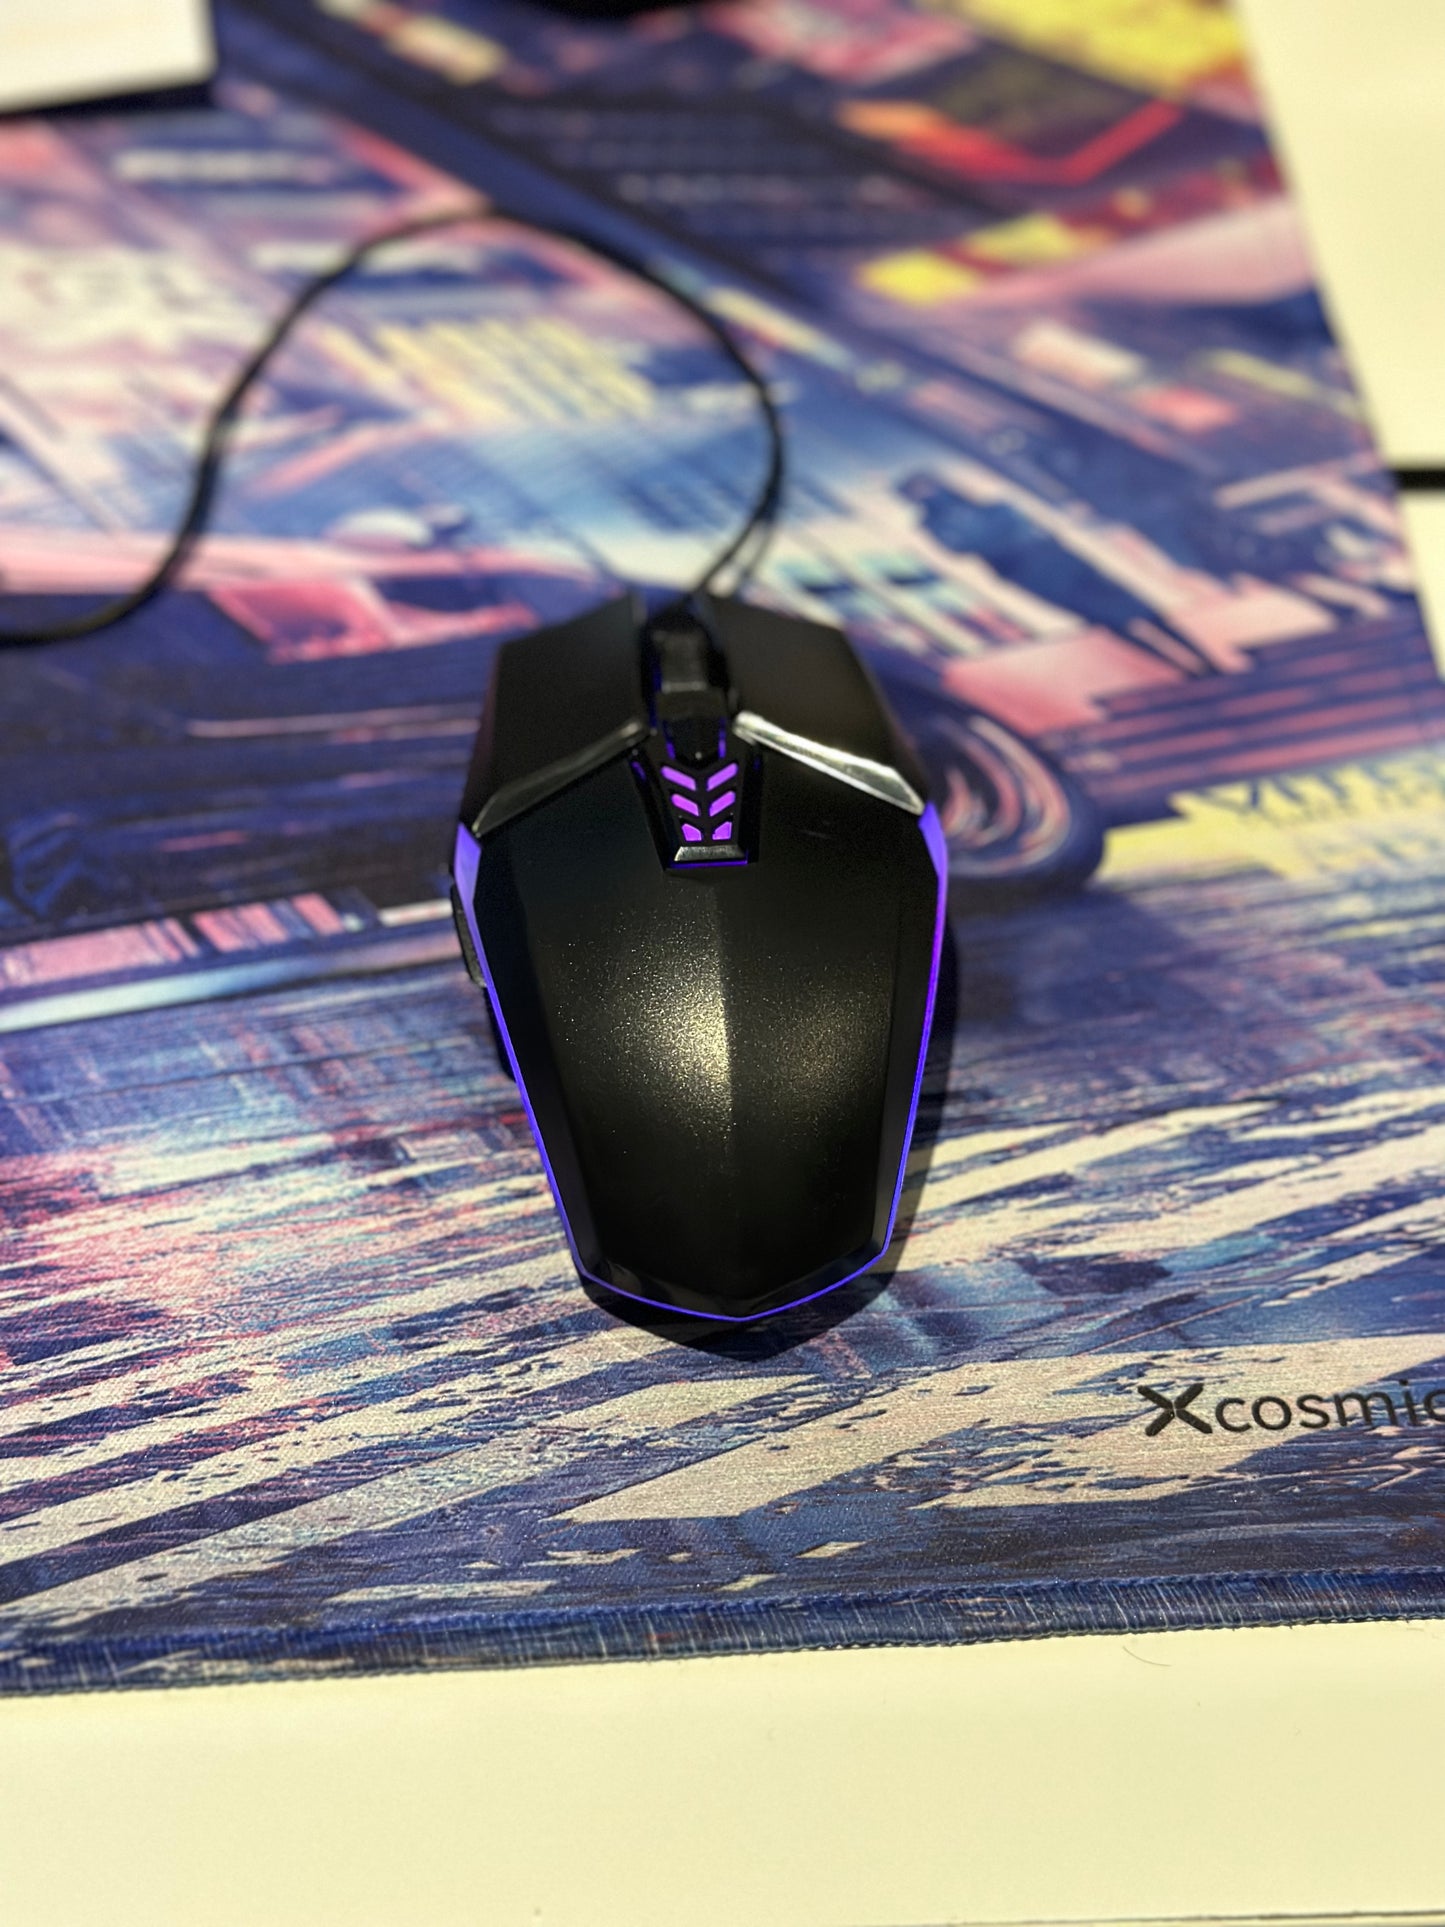 S700 Series A RGB Gaming Mouse Wired And Egomomic